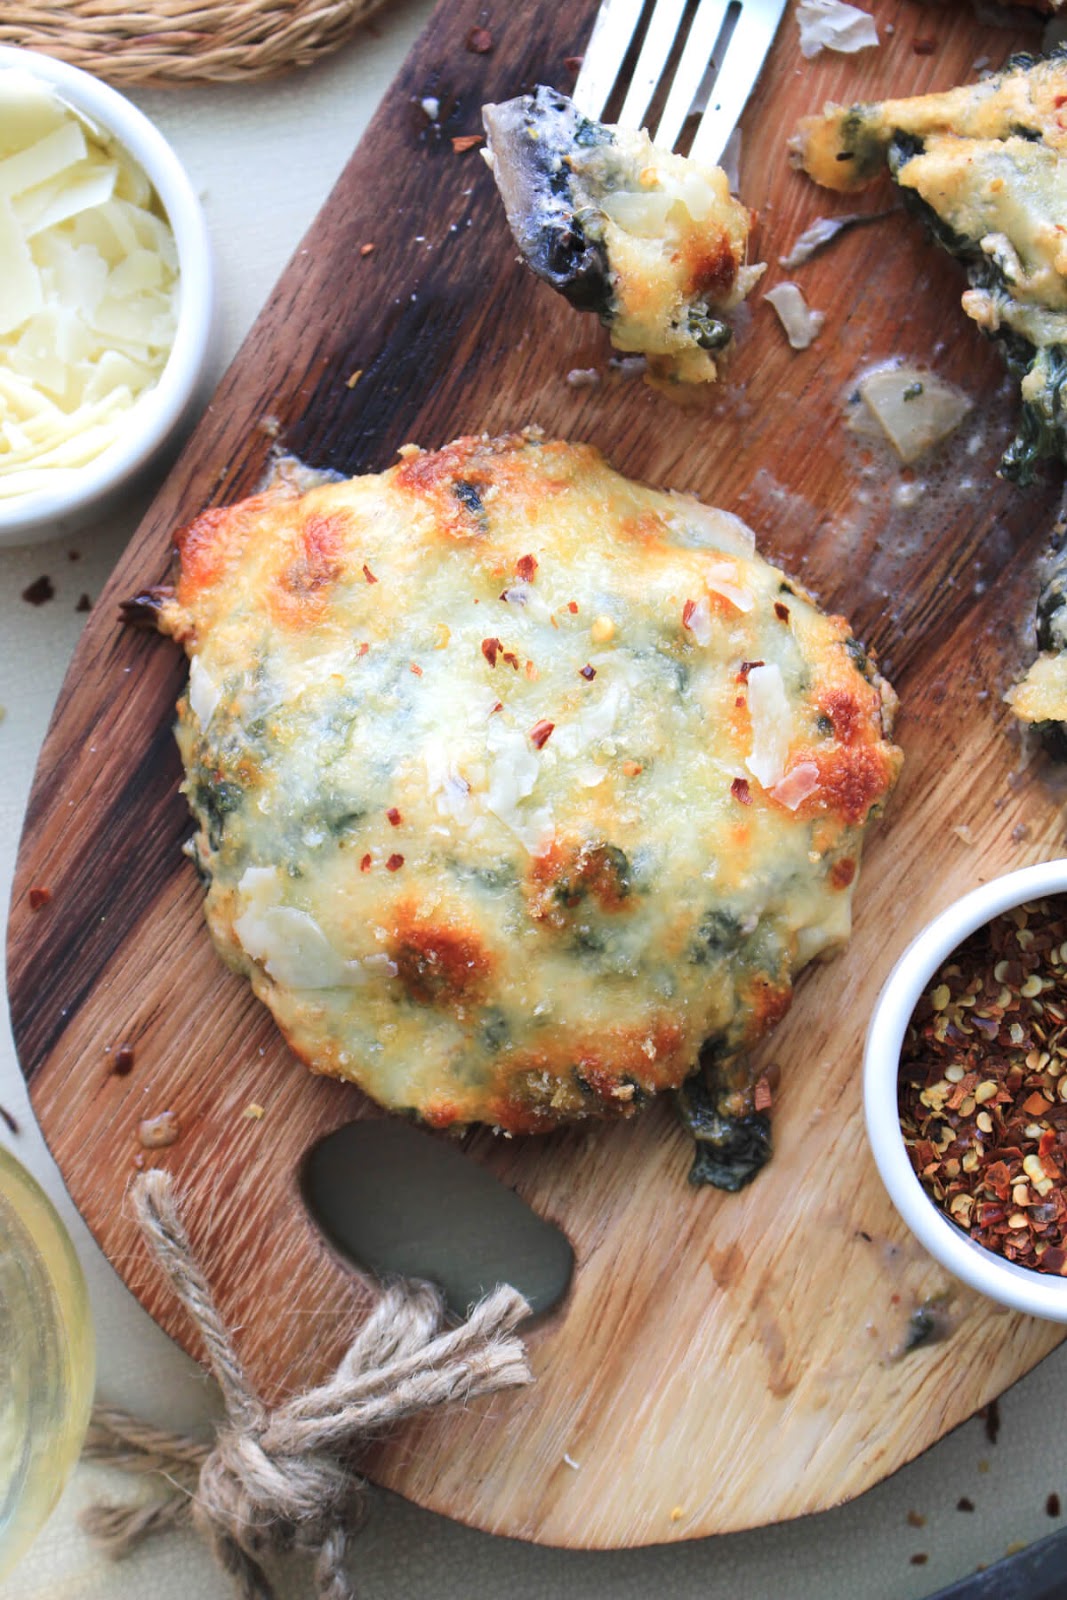 Spinach and Cheese Stuffed Portobello Mushrooms make a rich and decadent side dish or light main dish! The creamy, cheesy filling paired with the earthy mushrooms is ridiculously good!